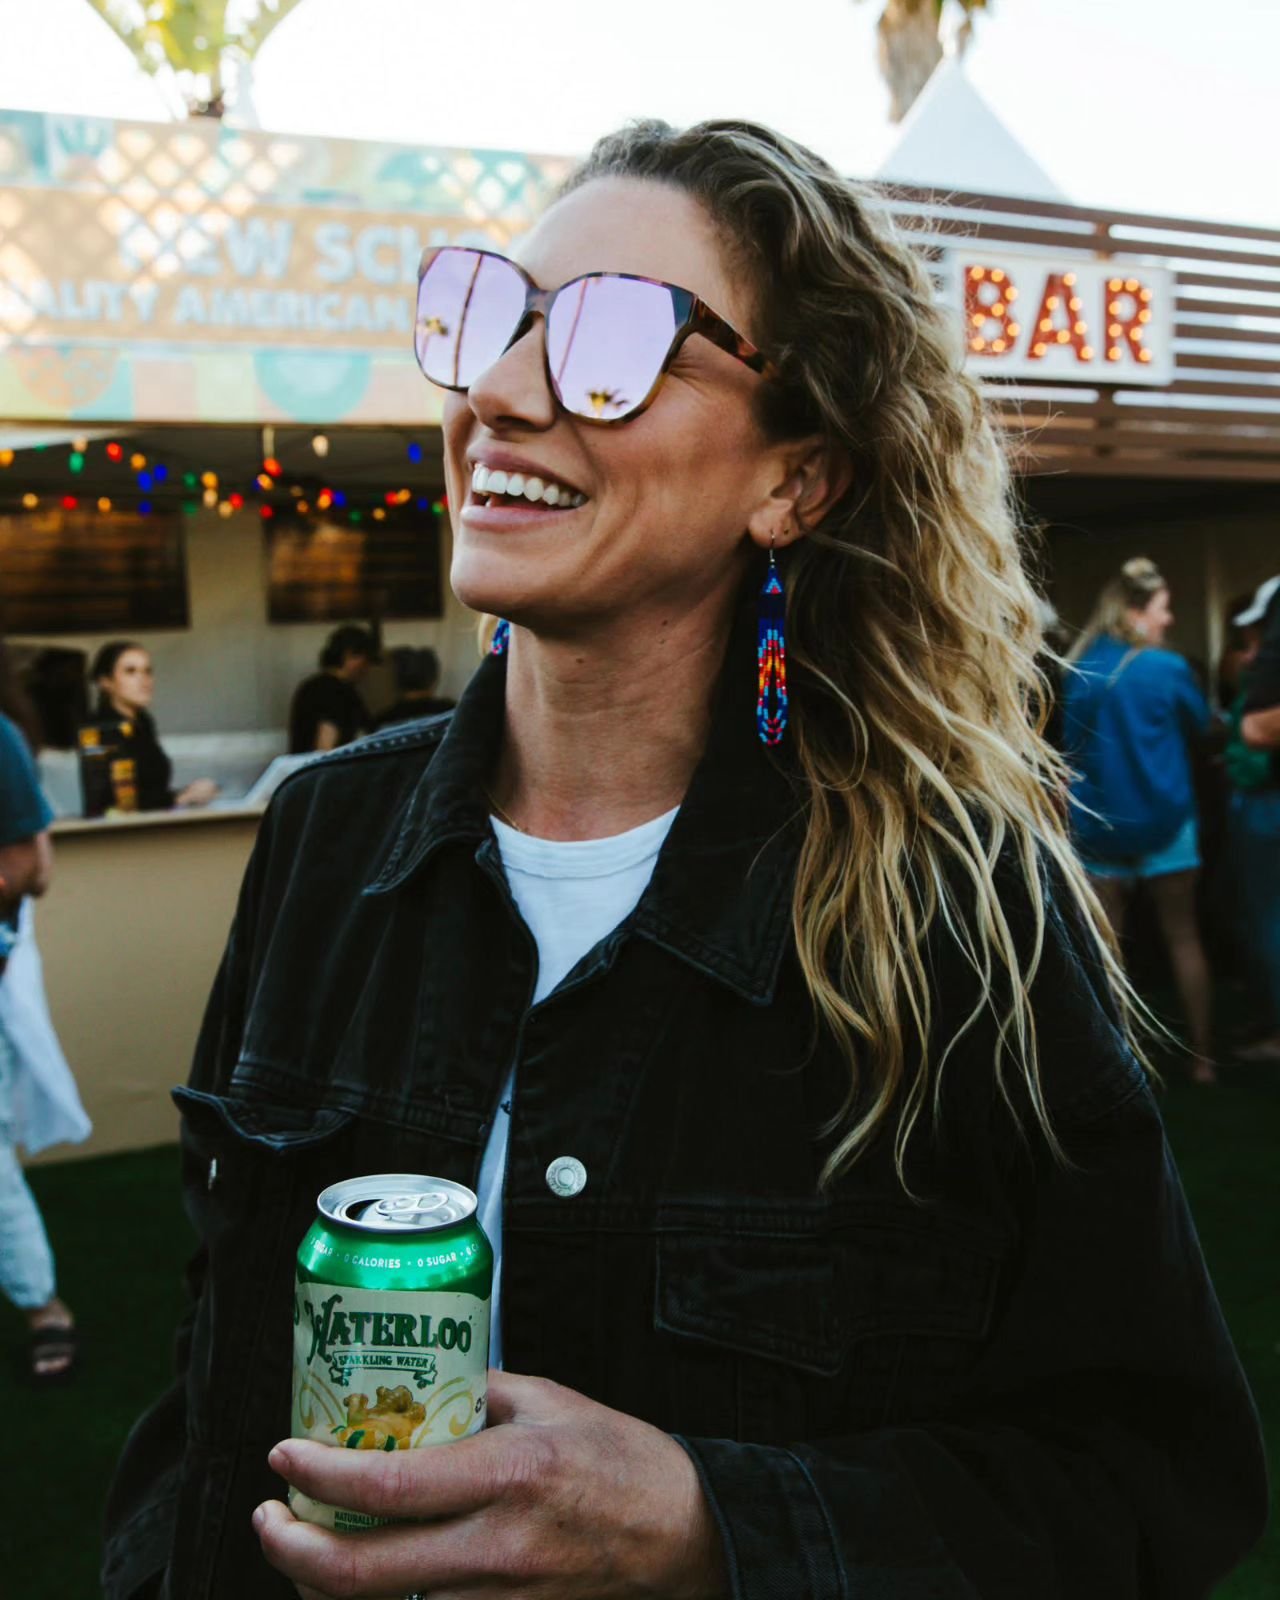 Like #HighSierraMusicFestival, Waterloo Sparkling Water is all in on living life at full flavor. Spark your weekend with authentic flavors and lively carbonation. That's how we Water Down Nothing. 

@waterloosparkling